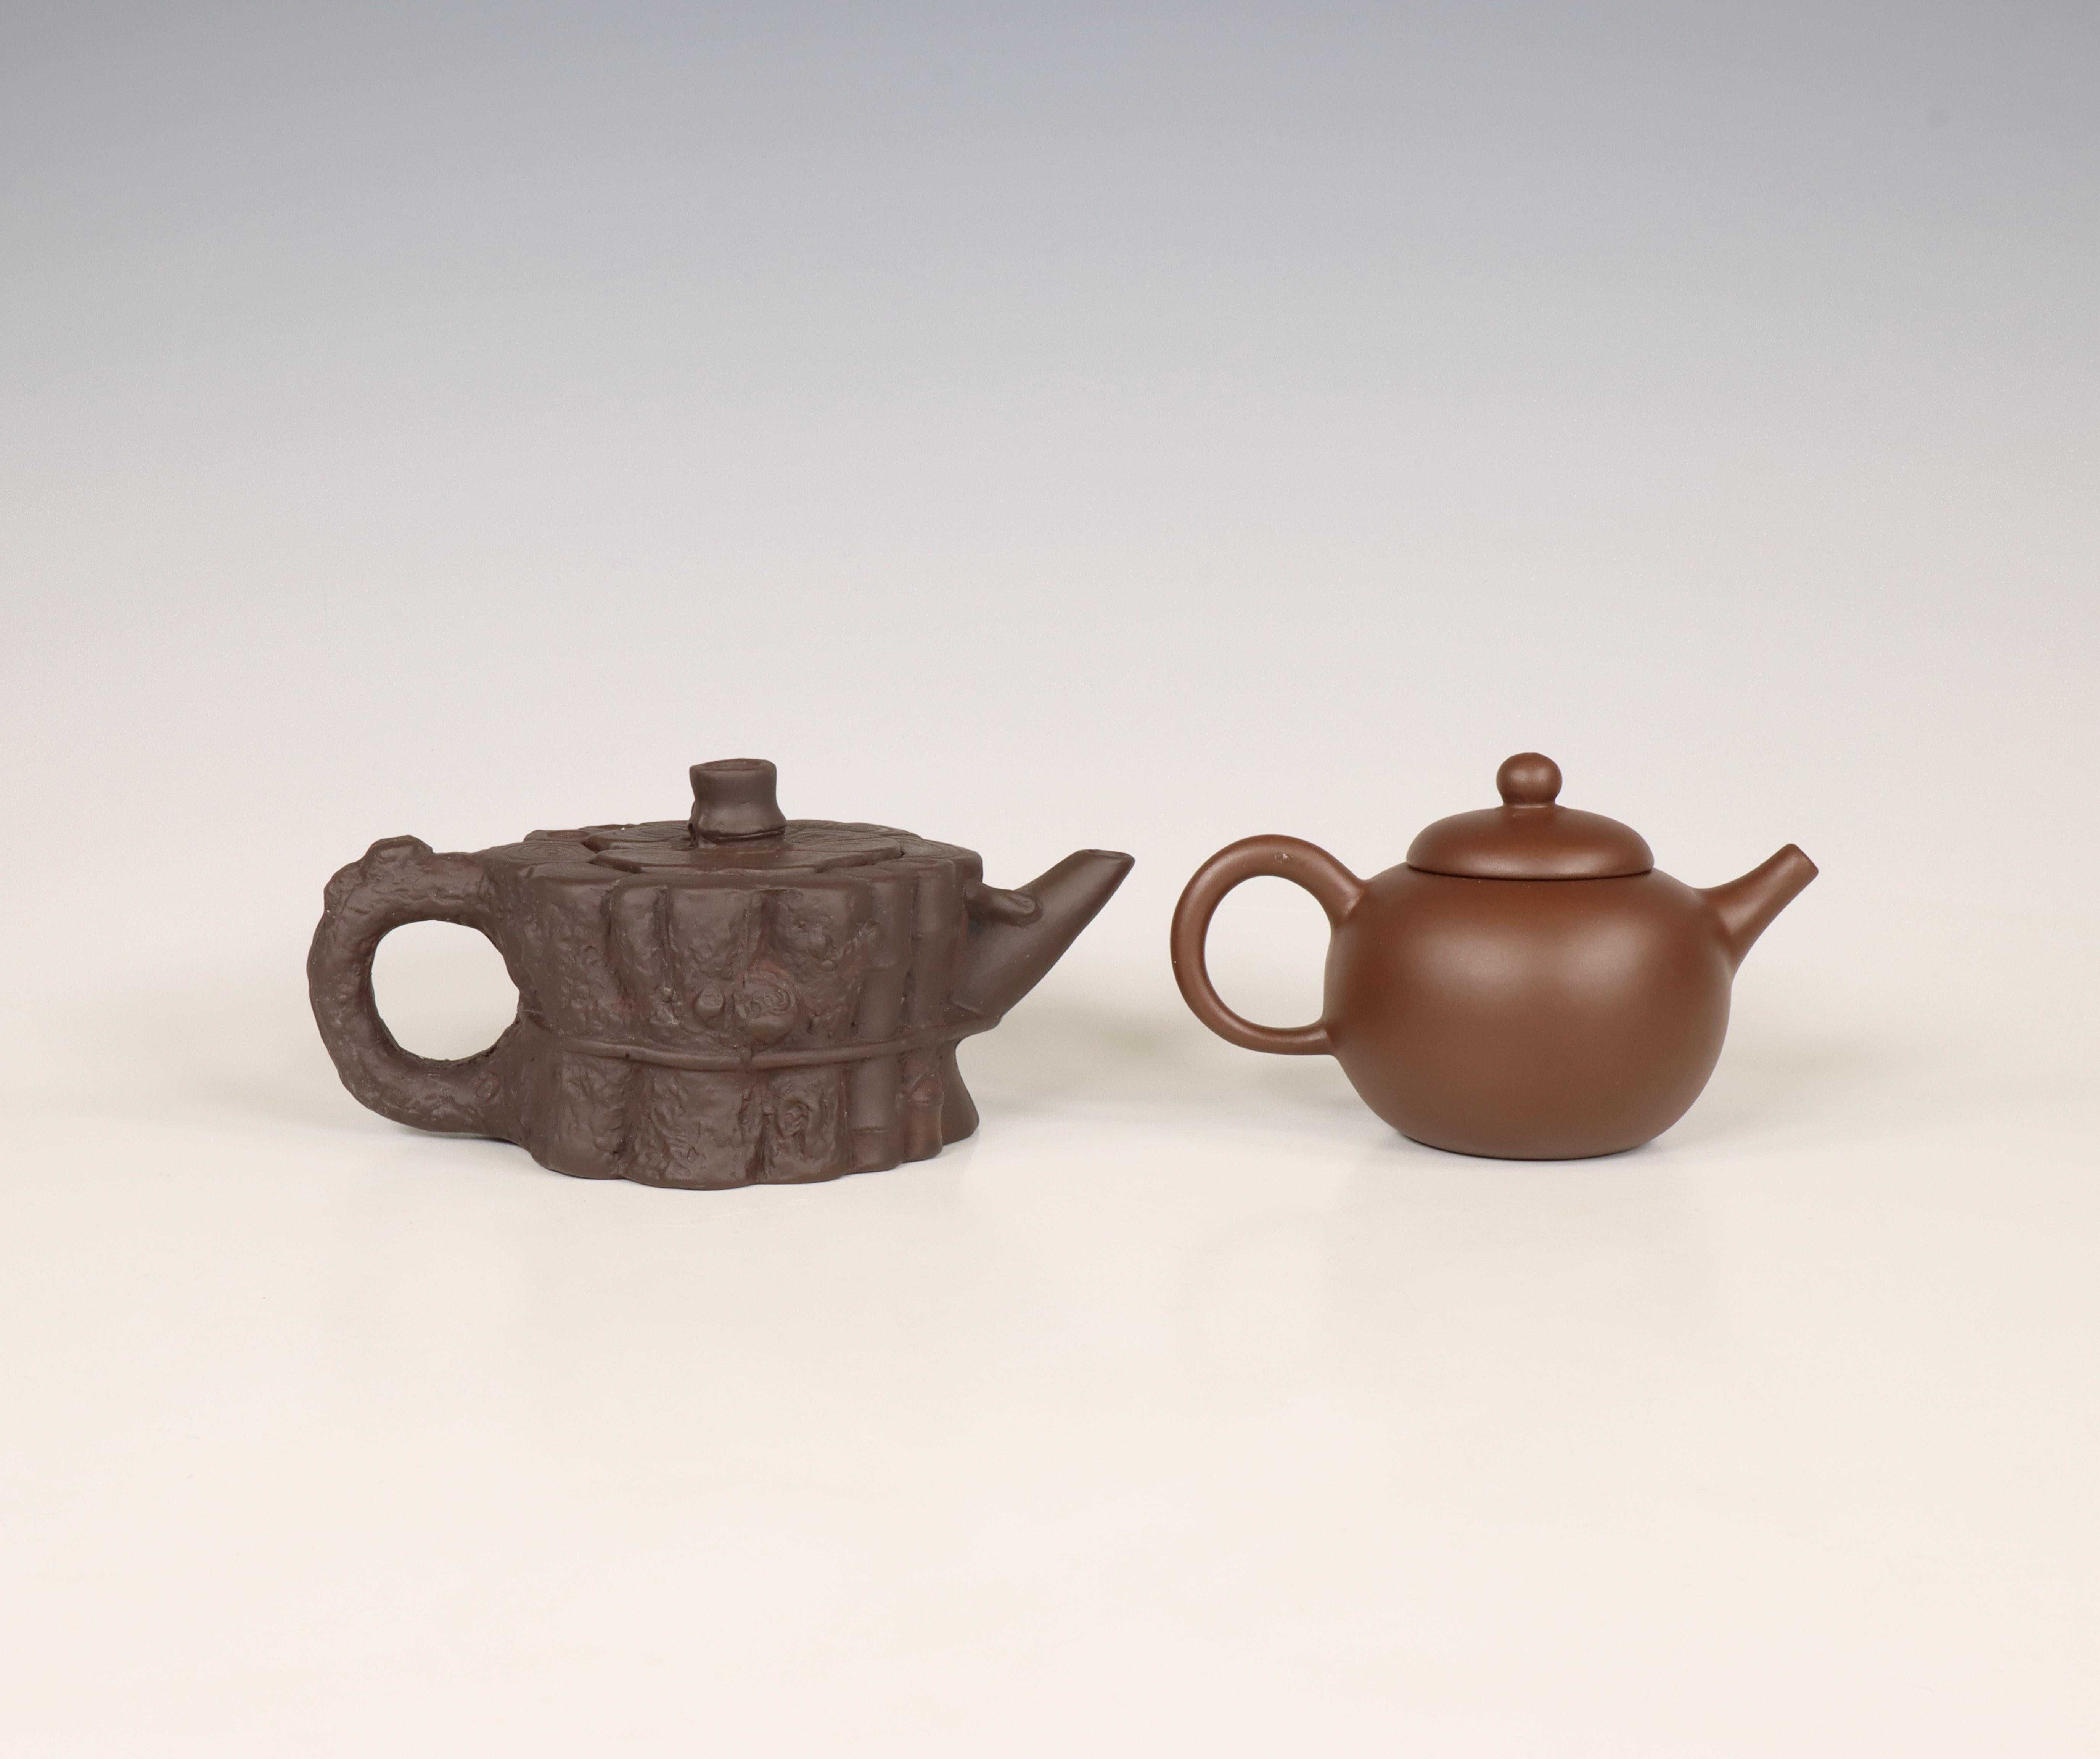 China, two Yixing earthenware teapots and covers, modern, - Image 3 of 3